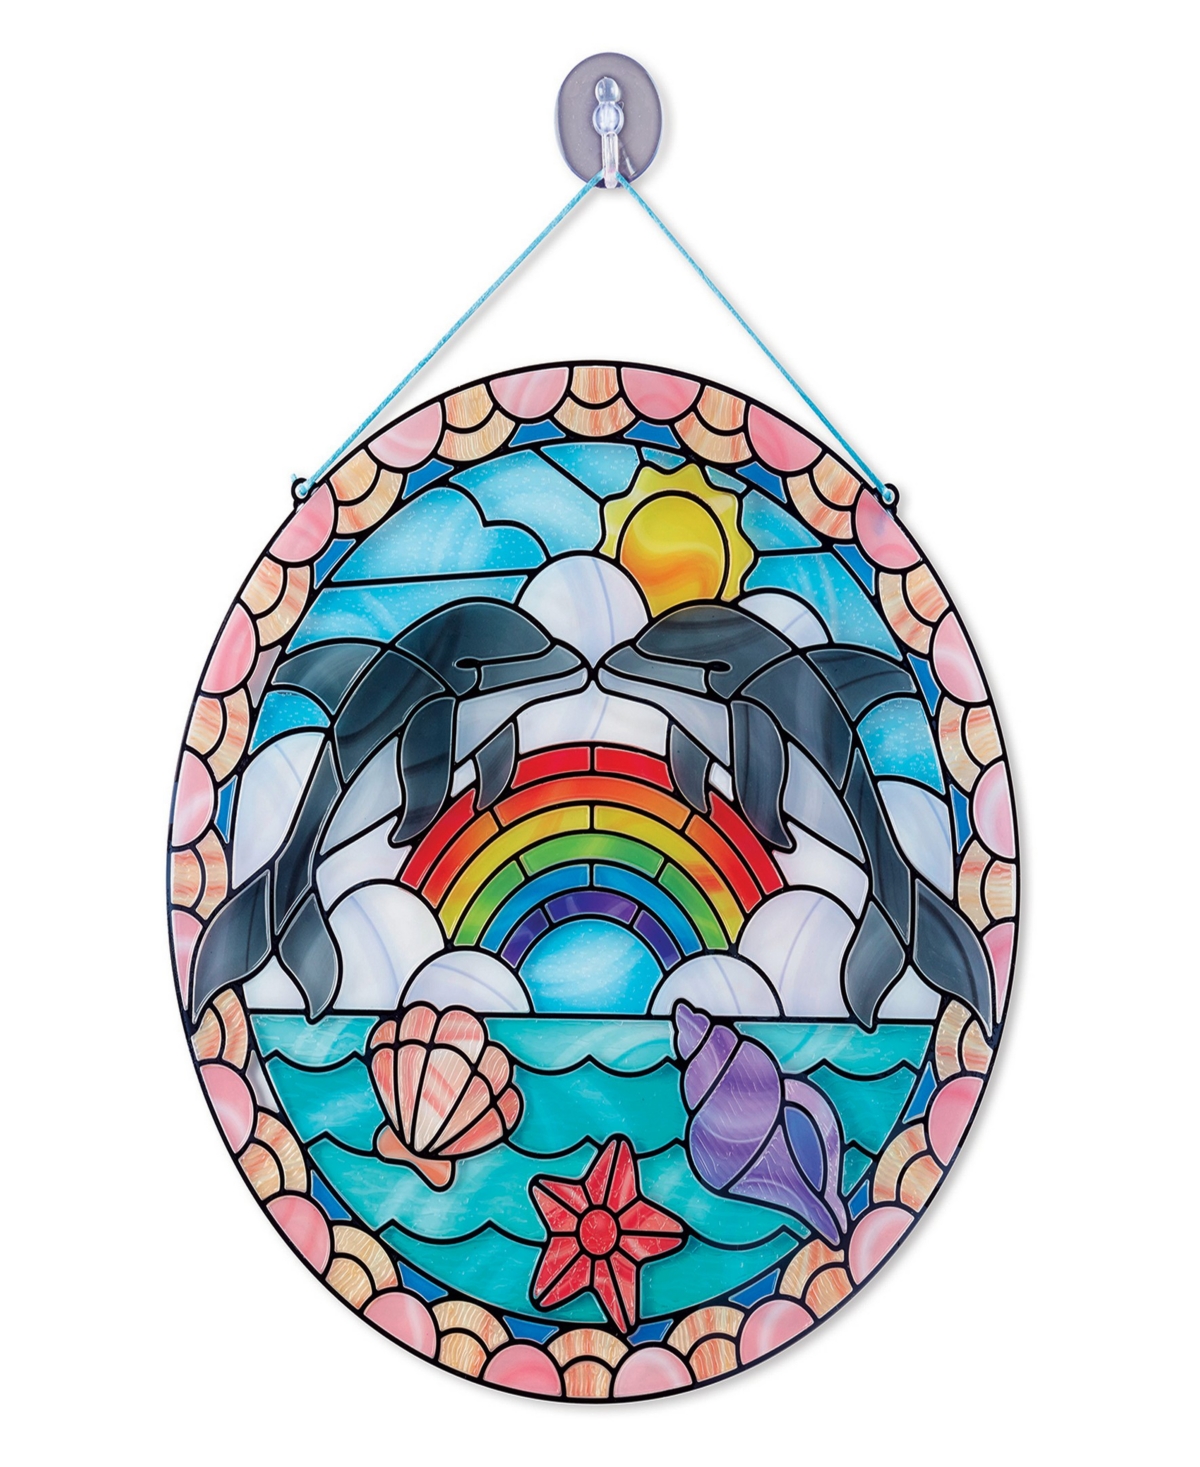 Melissa & Doug Stained Glass Made Easy Craft Kit: Dolphins - 180+ Stickers - Multi